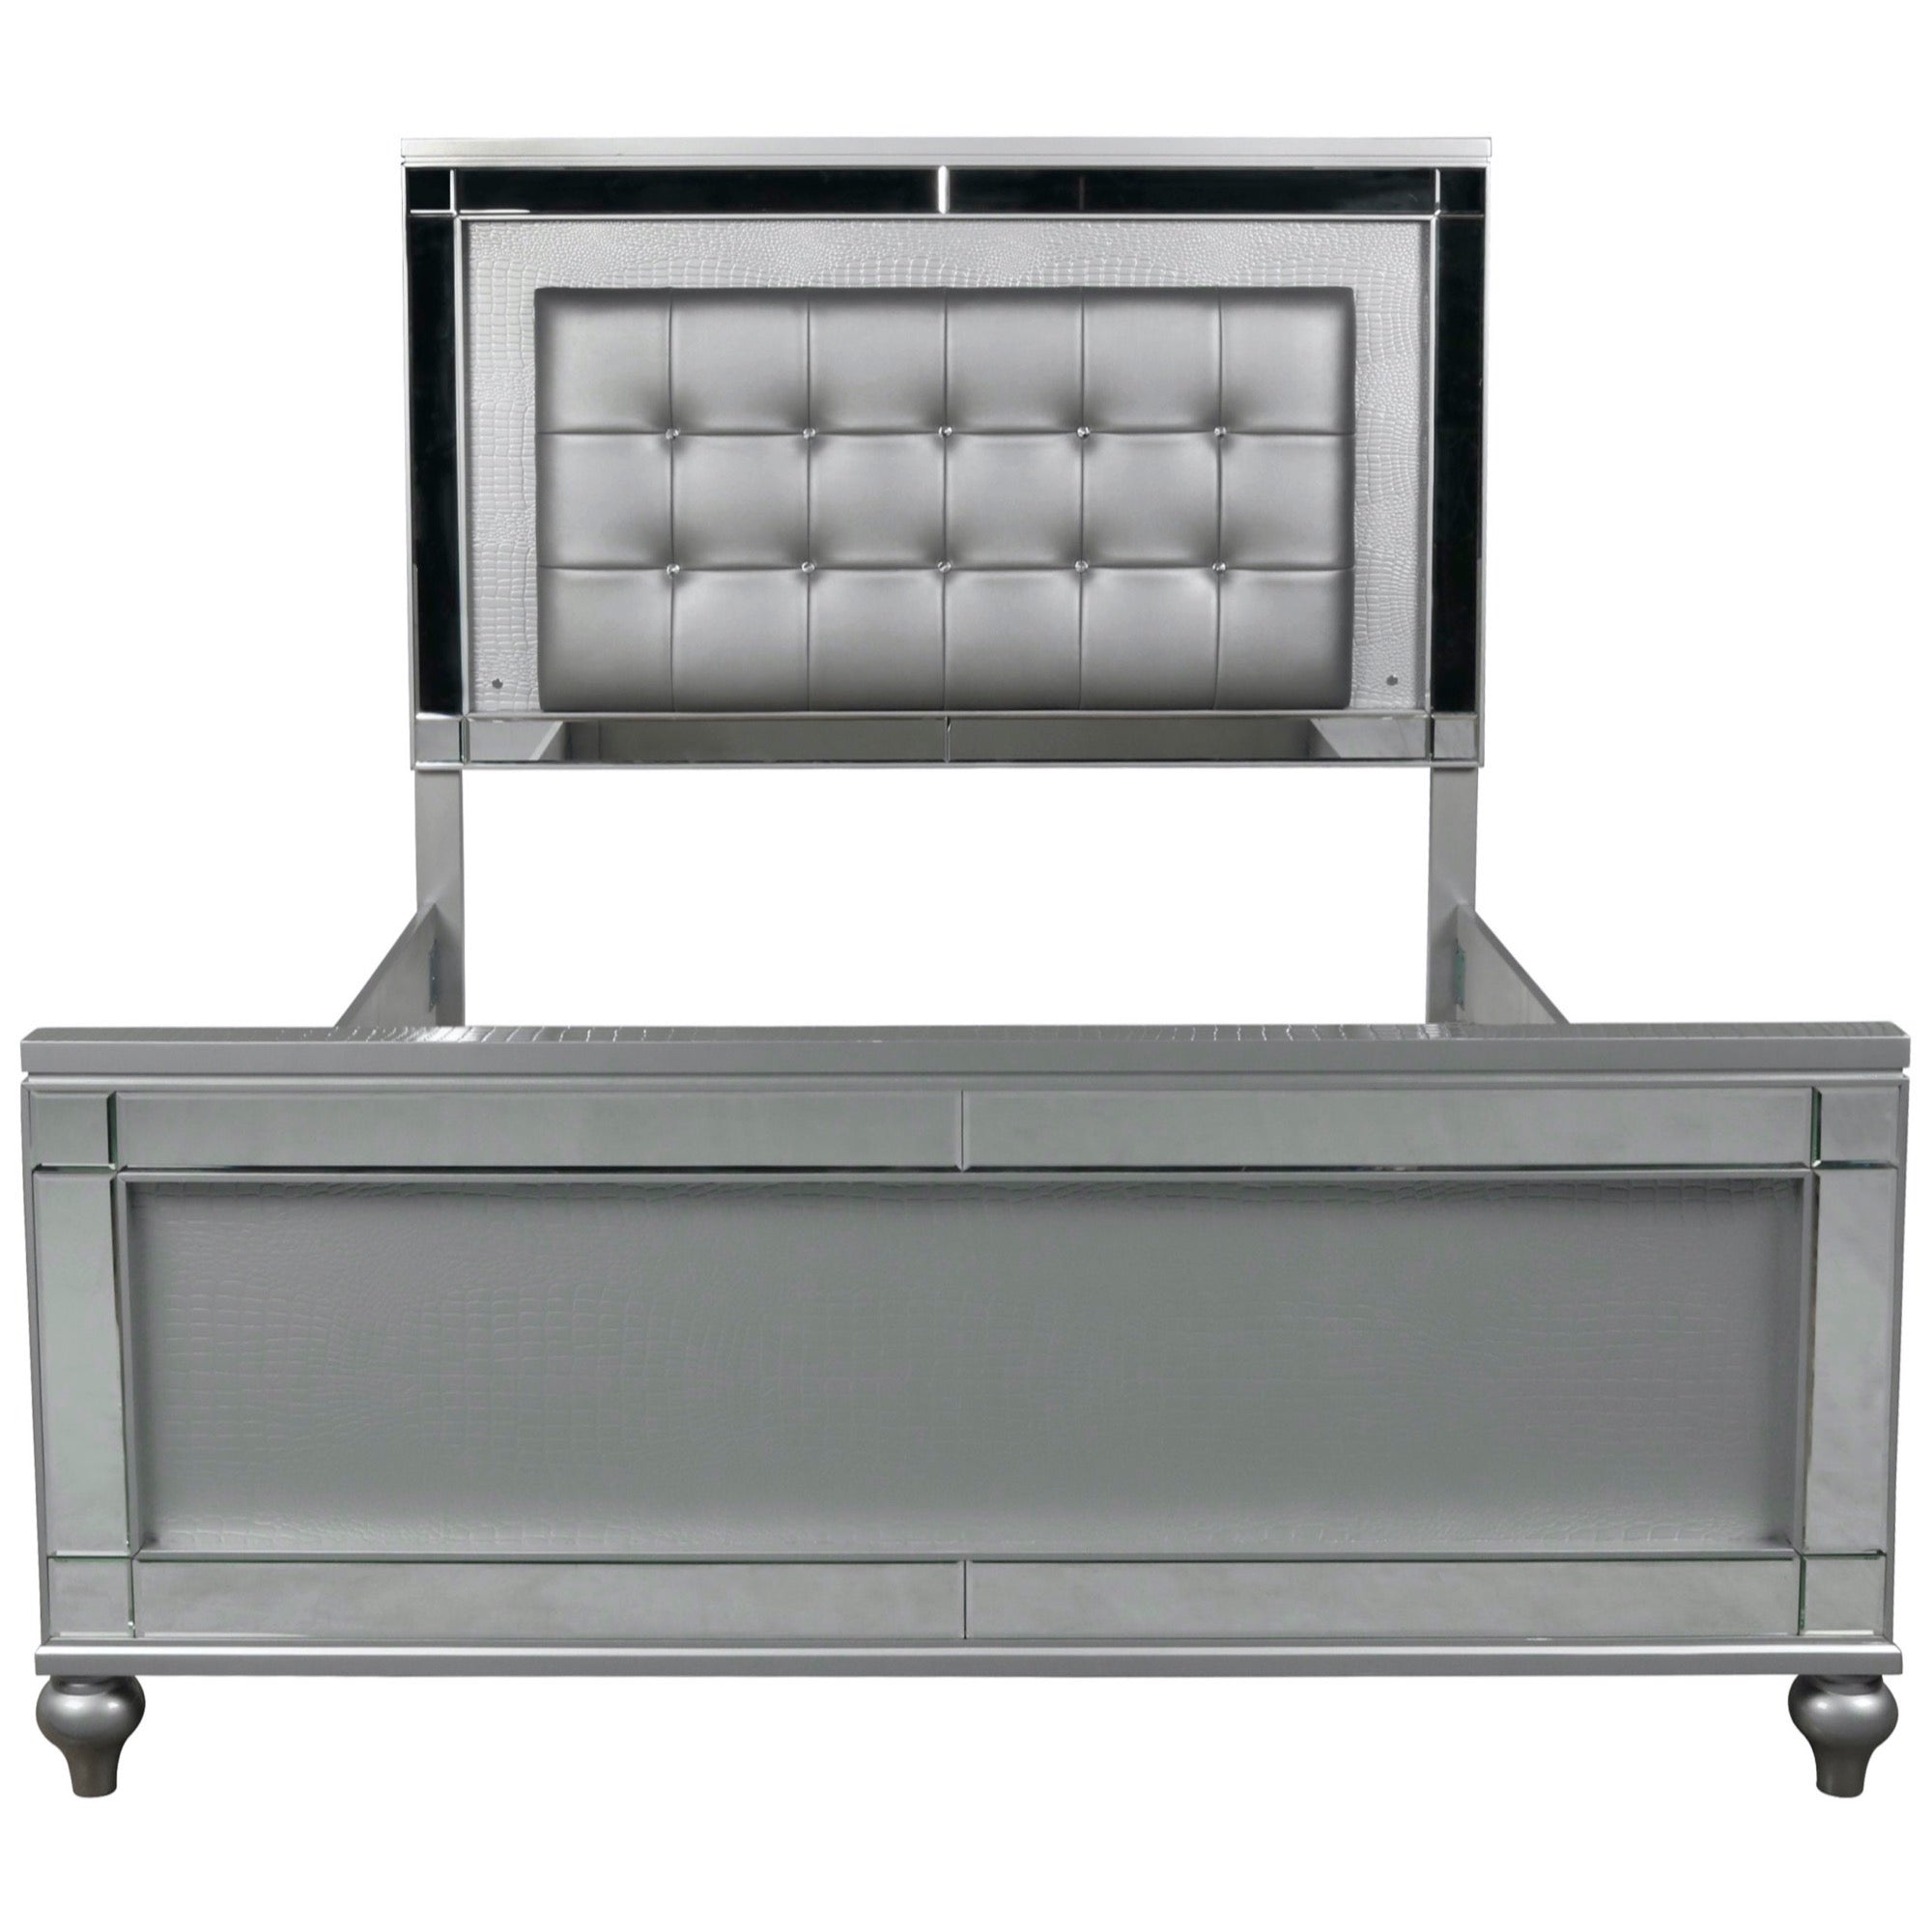 Valentino Queen Bed with Lighted Headboard